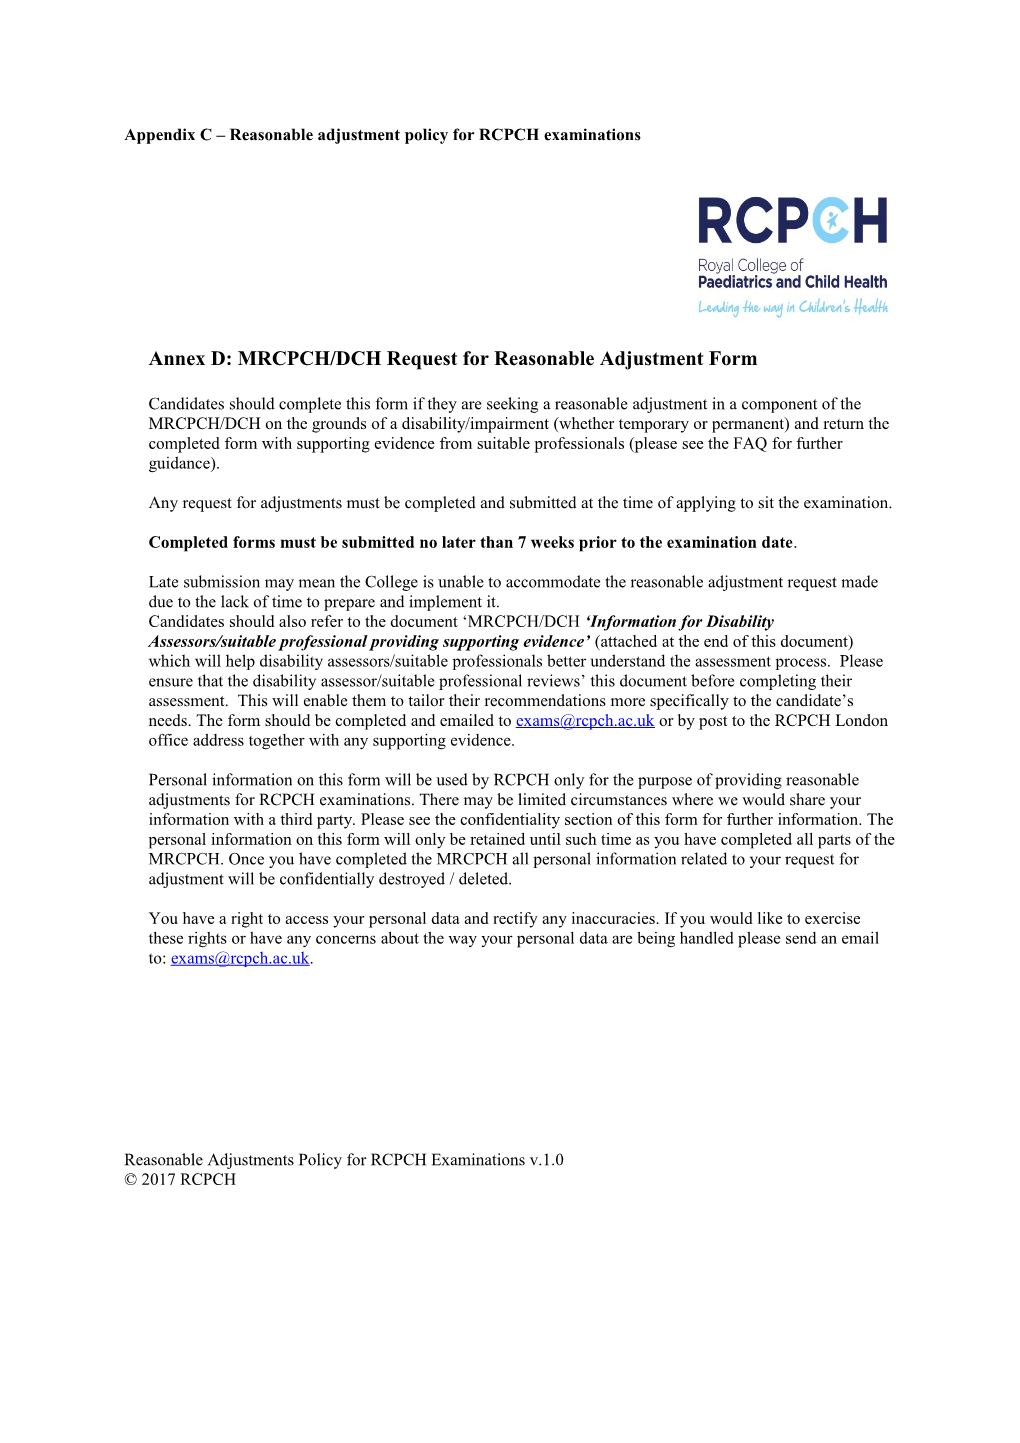 Appendix C Reasonable Adjustment Policy for RCPCH Examinations